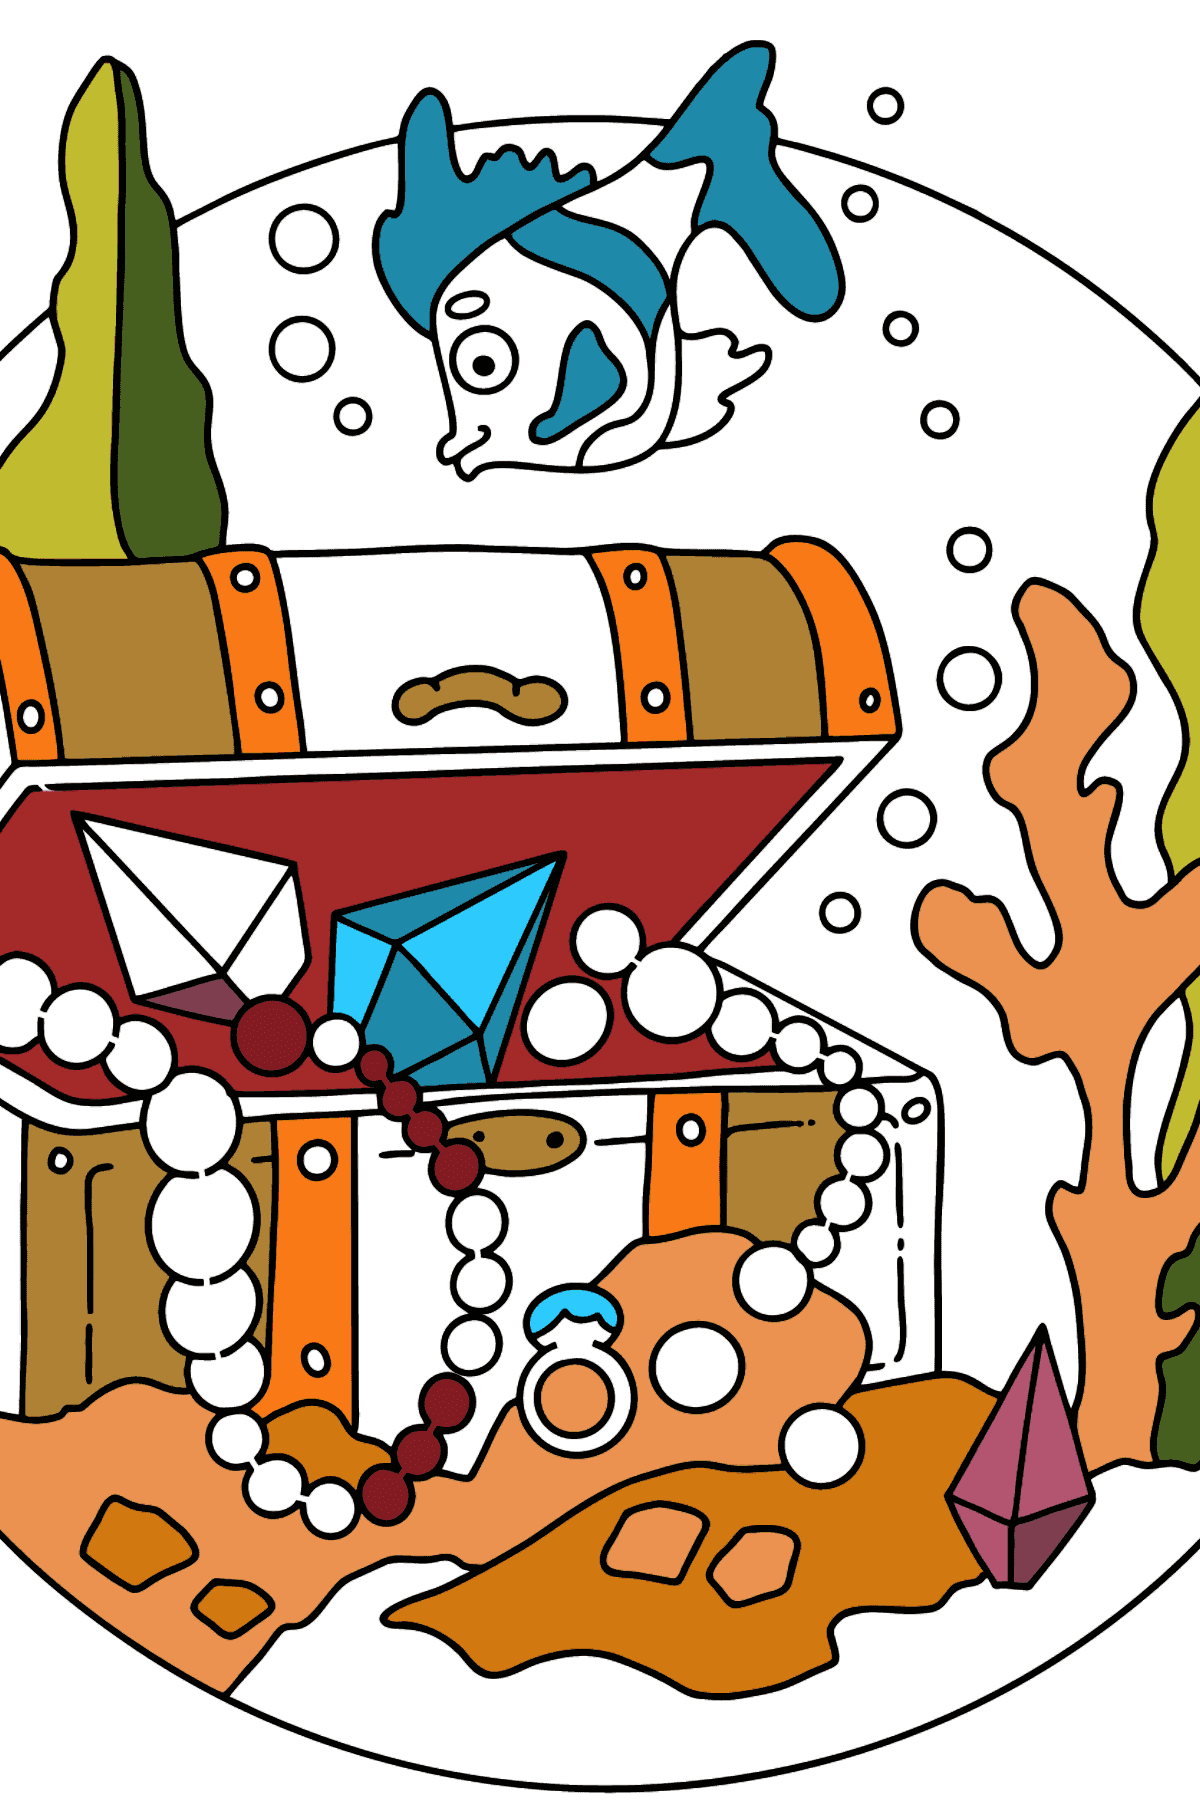 Coloring Page - A Fish is Looking for a Treasure - Coloring Pages for Kids